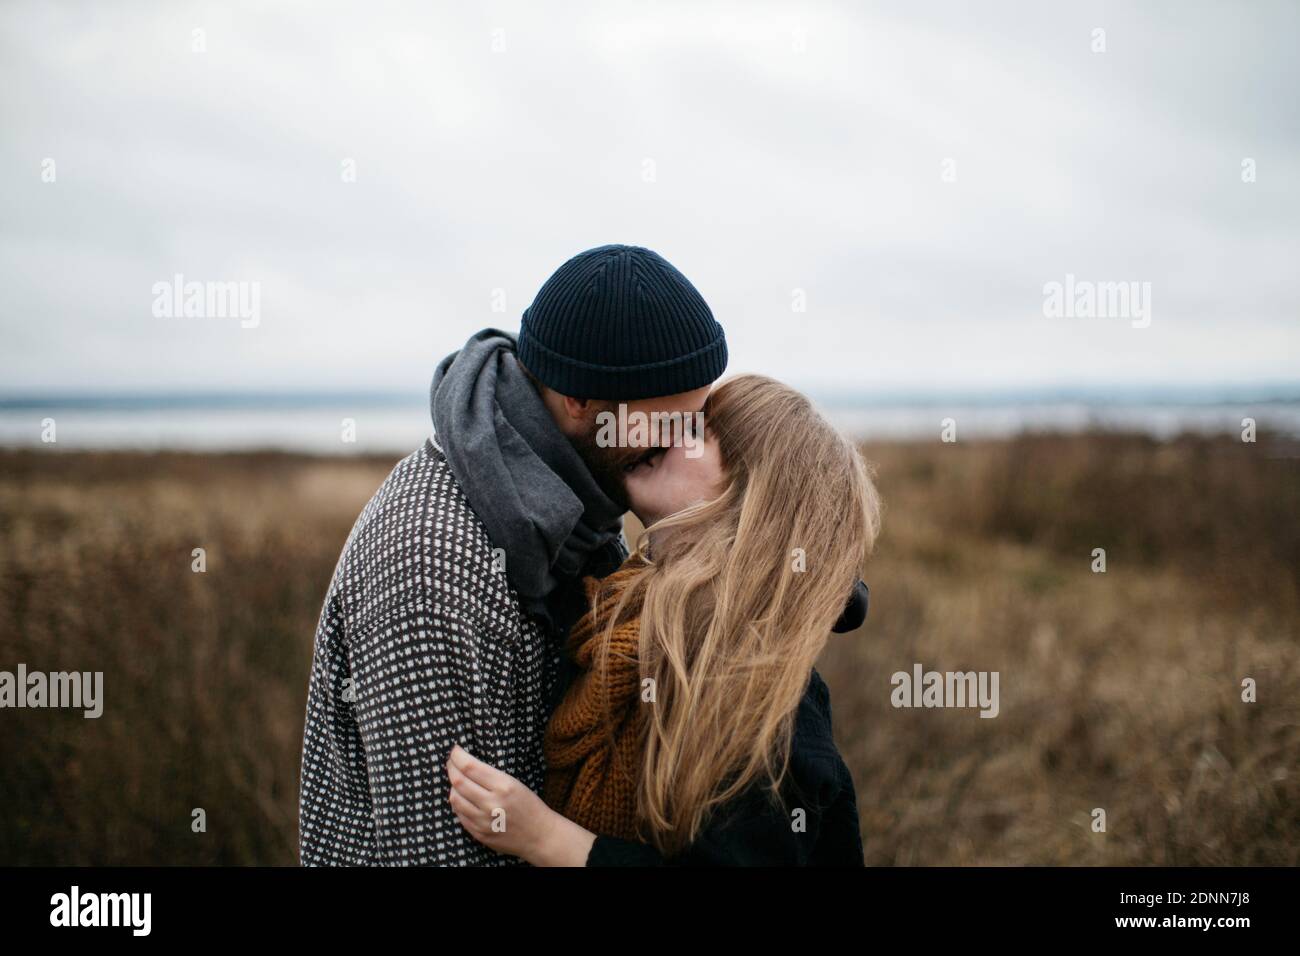 Couple standing together Stock Photo